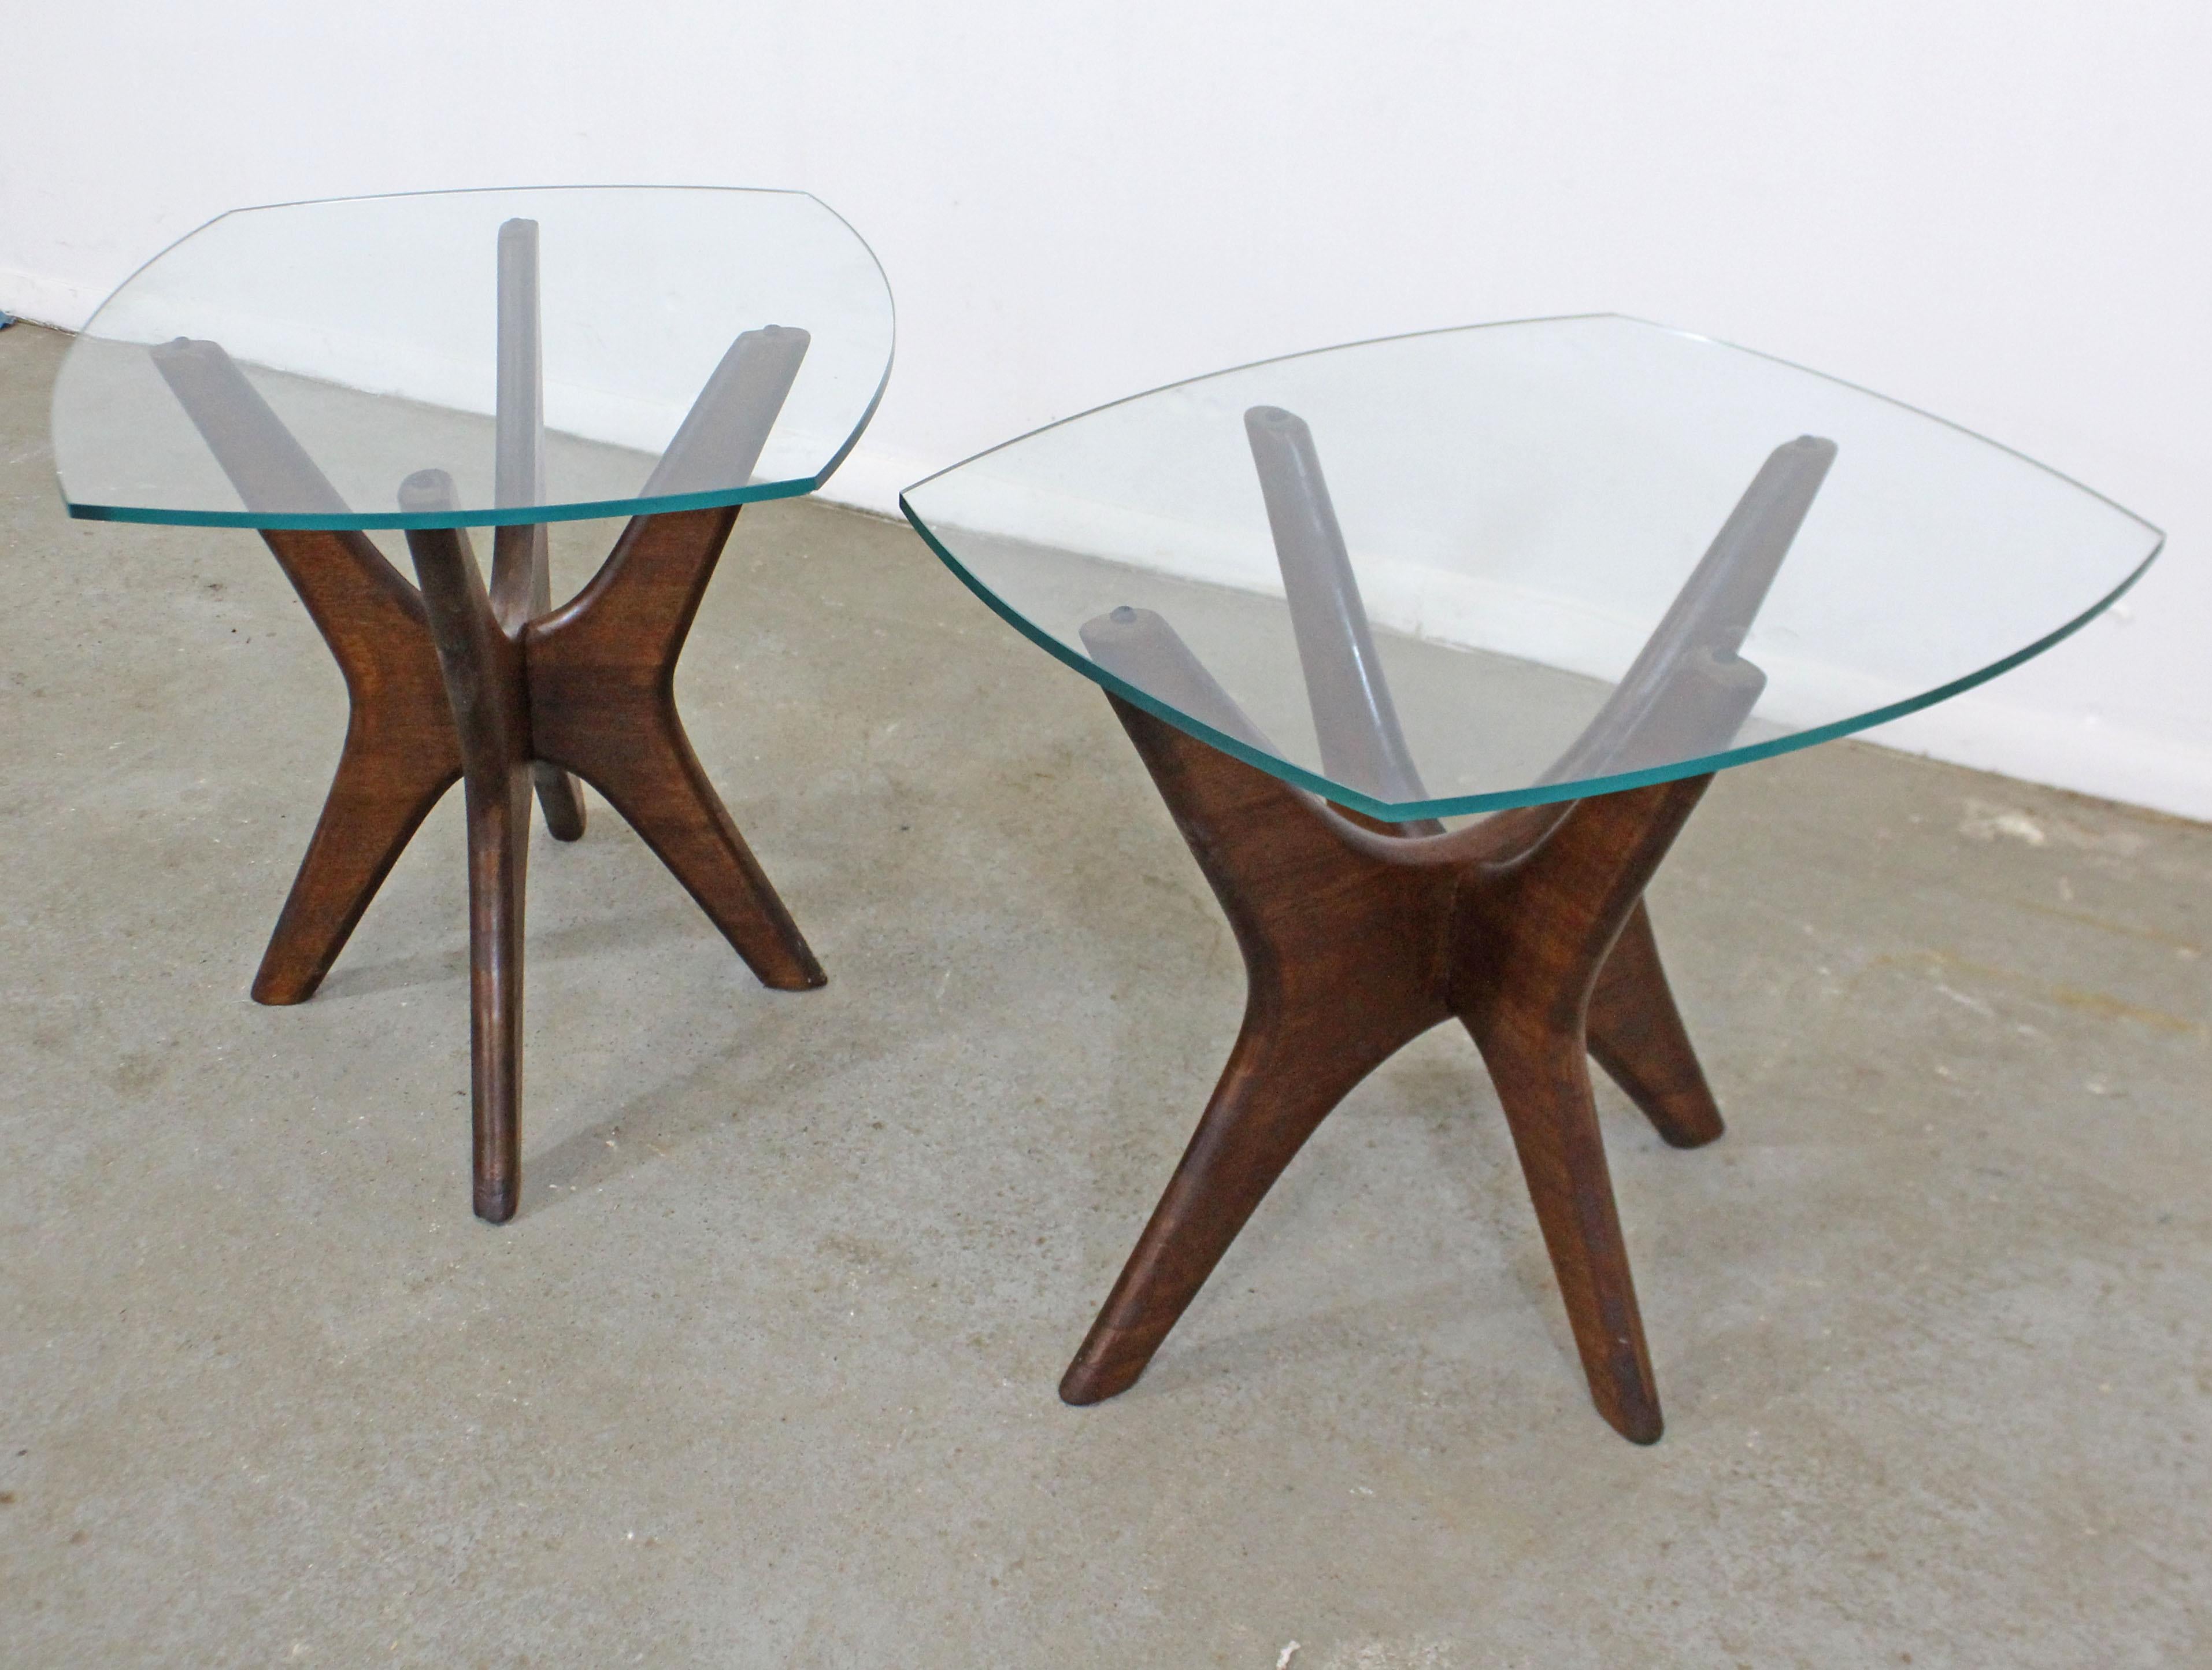 Offered is an authentic pair of Adrian Pearsall 'Jacks' end tables sculpted wooden bases and thick glass tops. In good condition for their age (surface scratches, small chips, age wear, see photos). They are not signed. A great piece to add to any